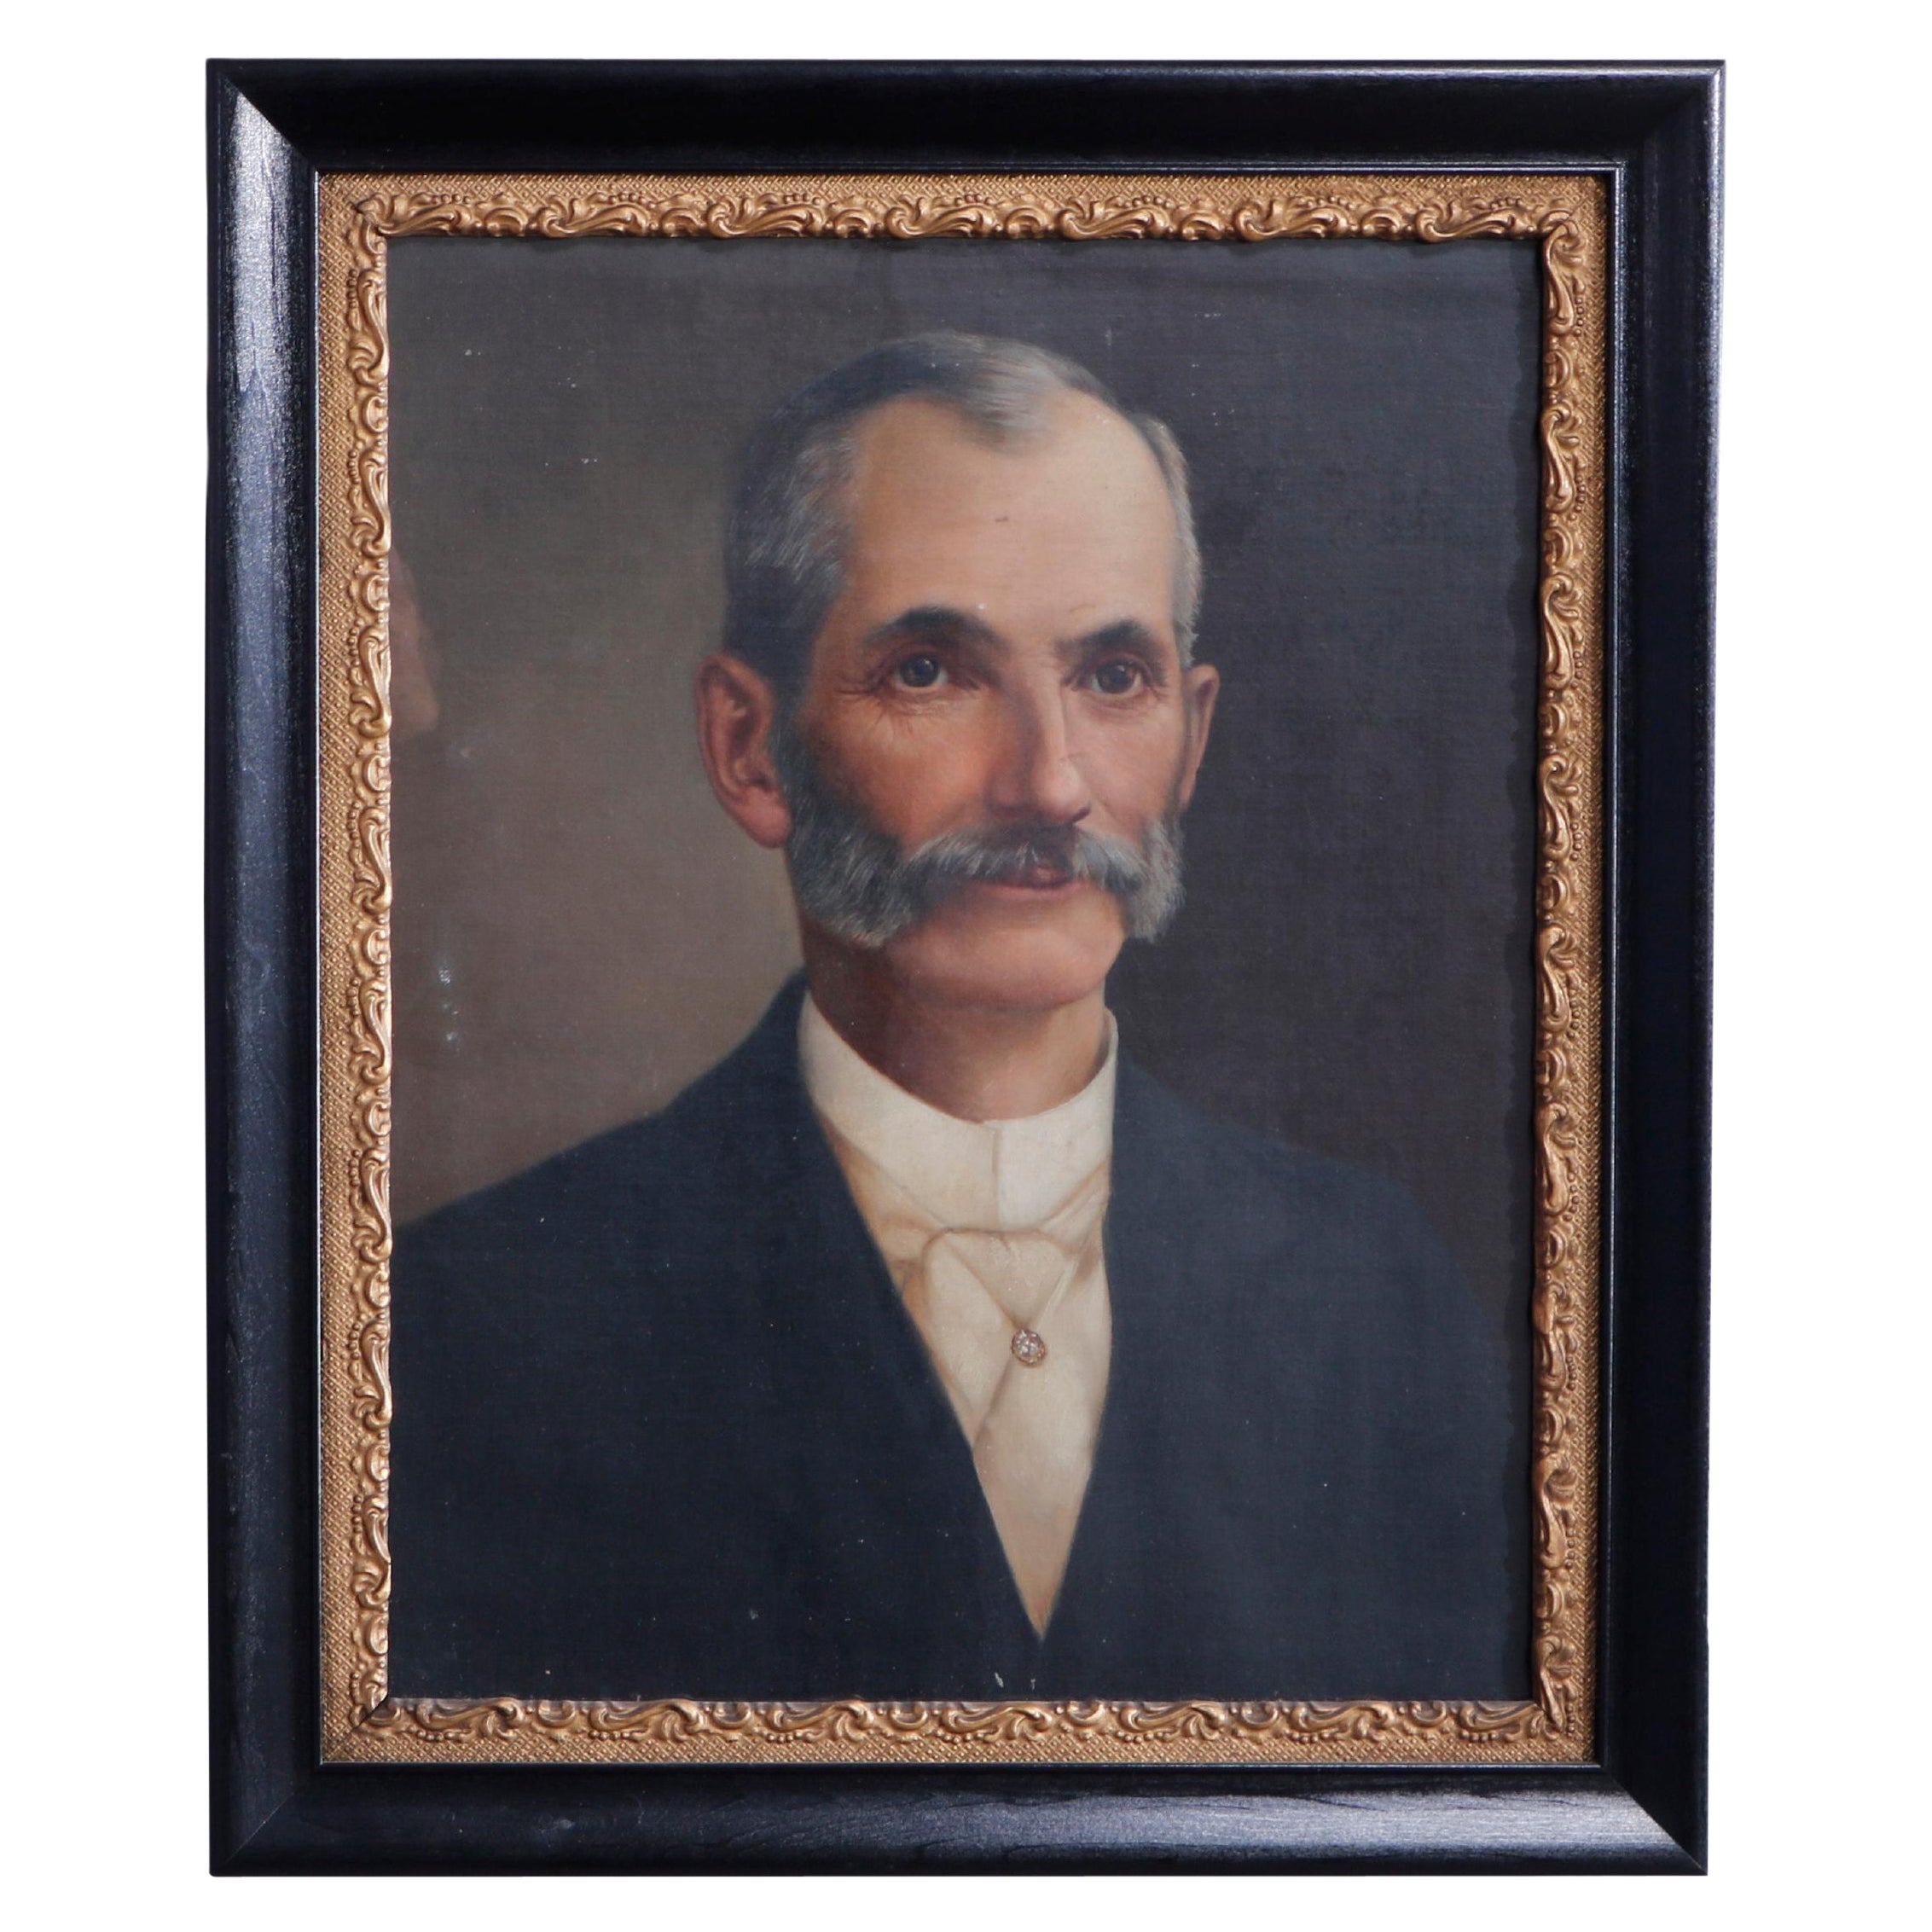 Antique Painting of a Gentleman by Charles Walz, 1910